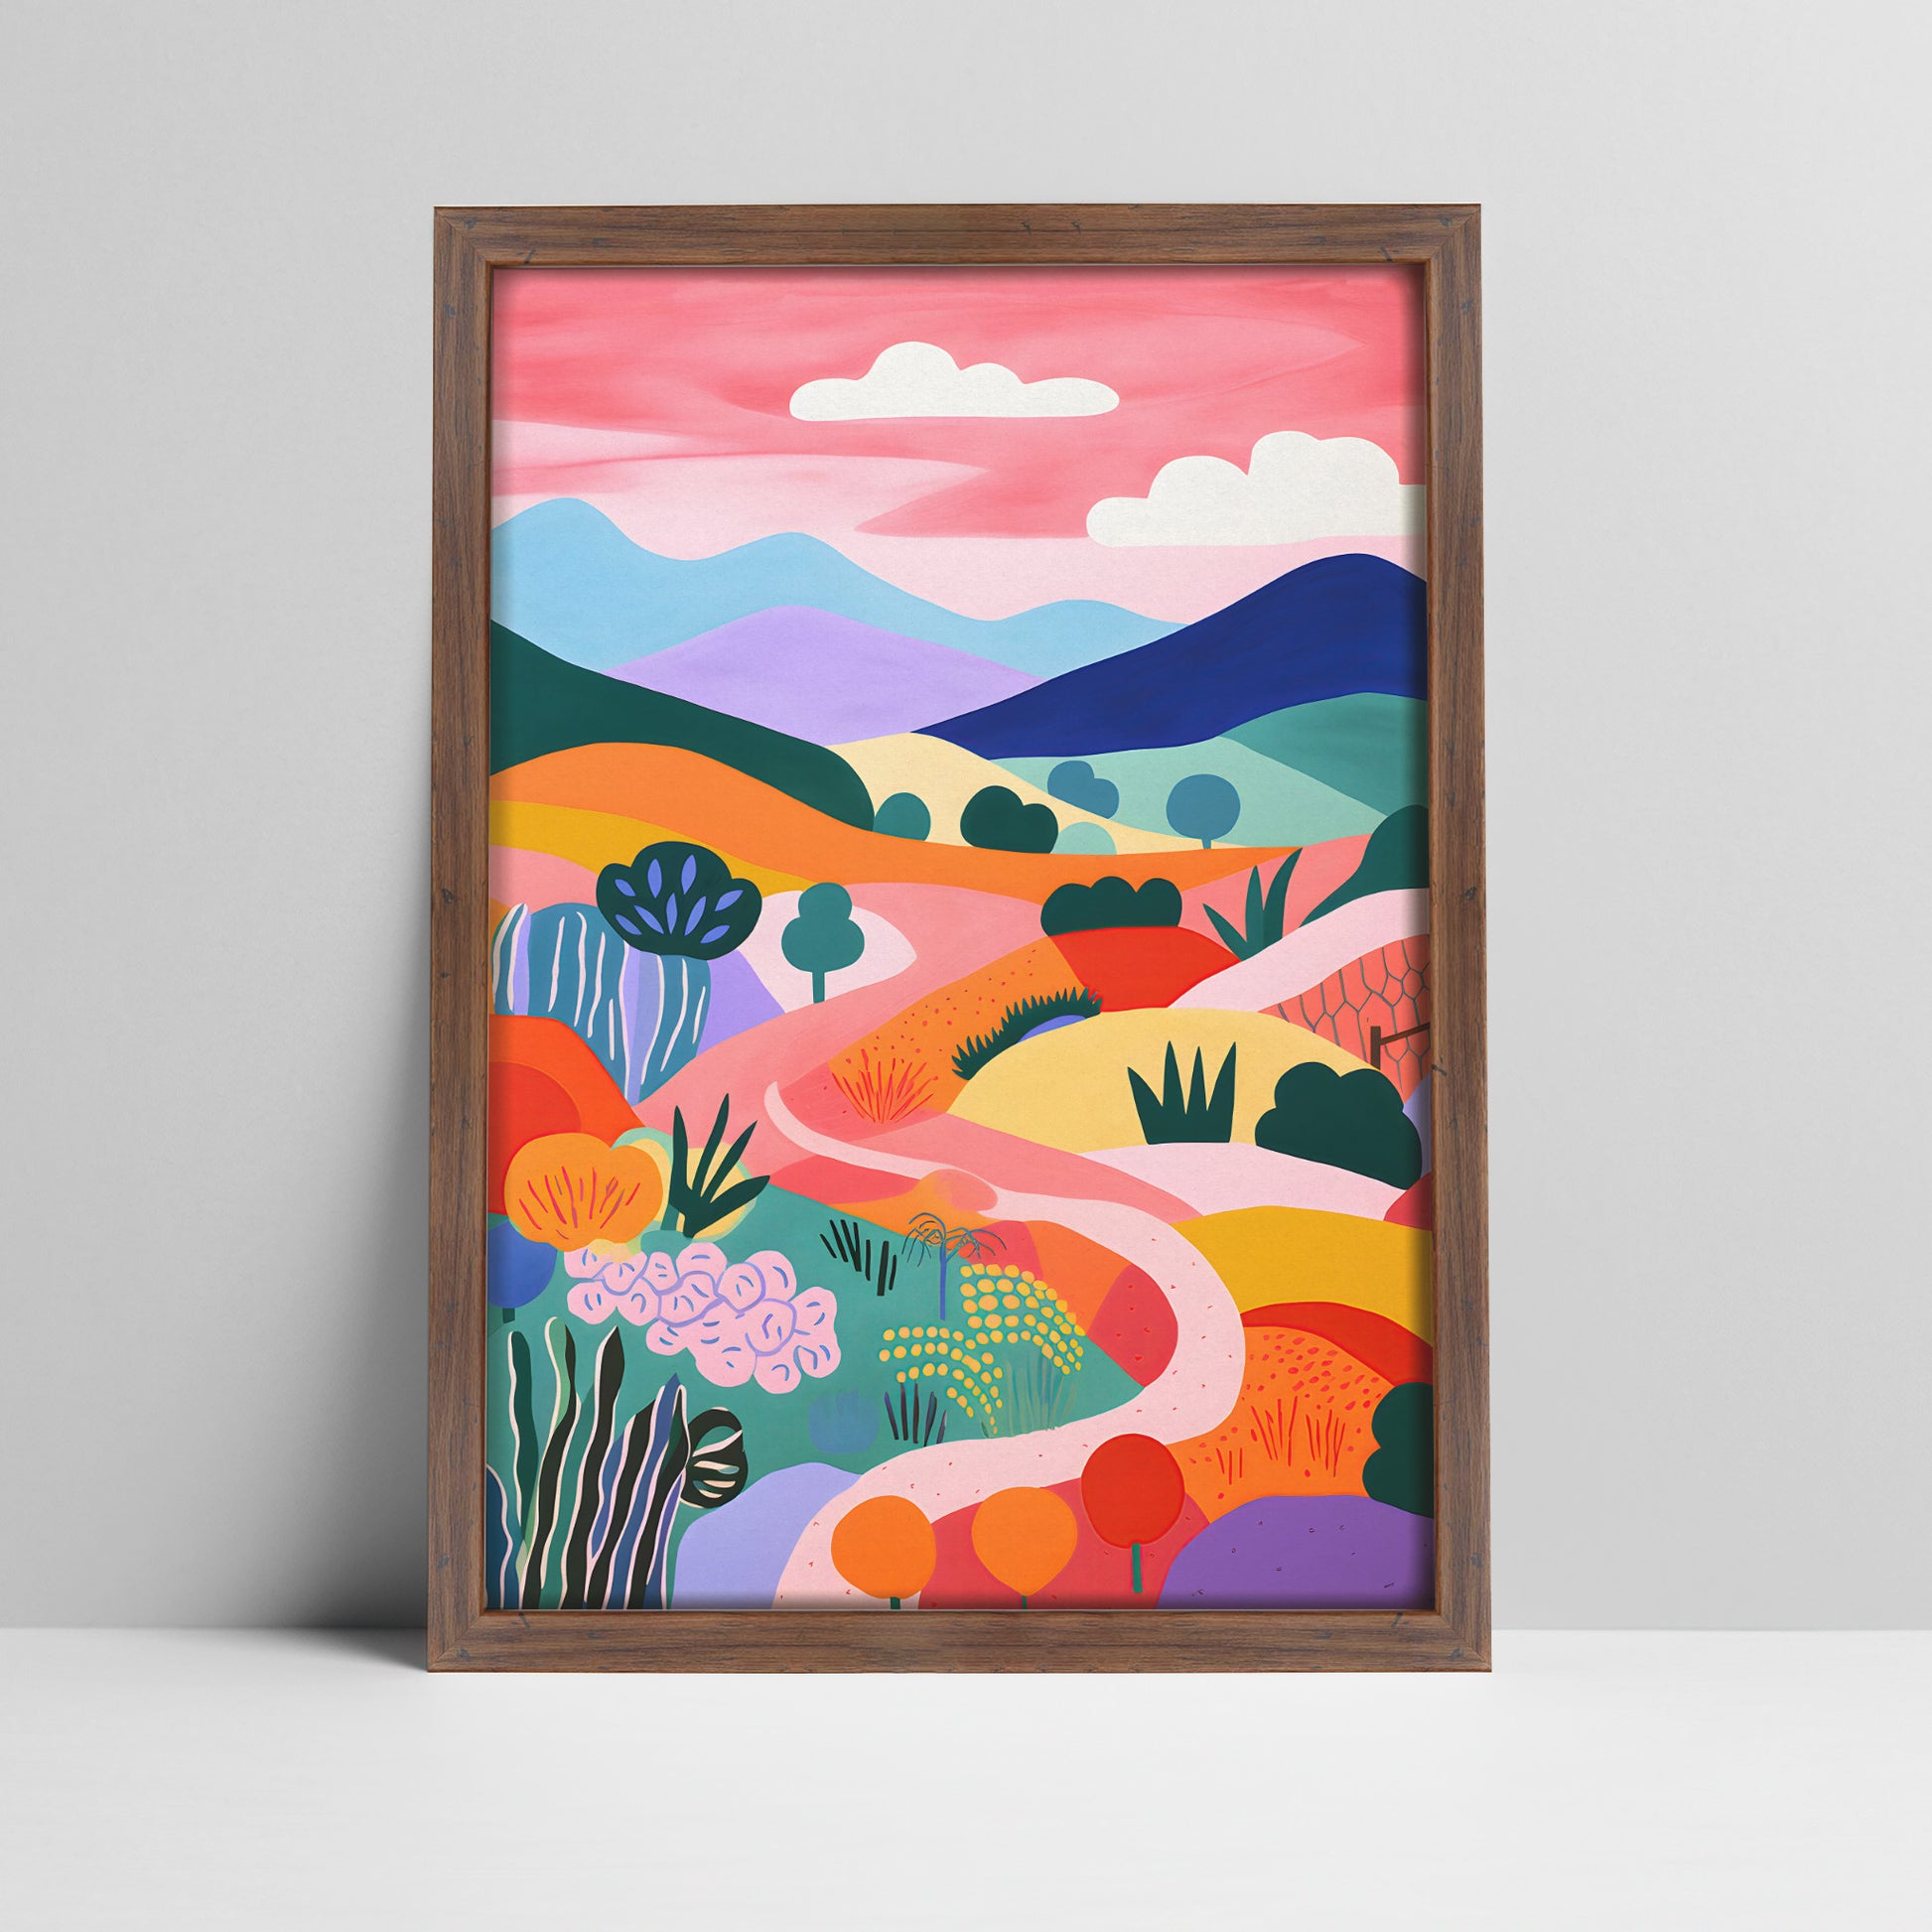 Abstract landscape with colorful hills and sky in a dark wood frame